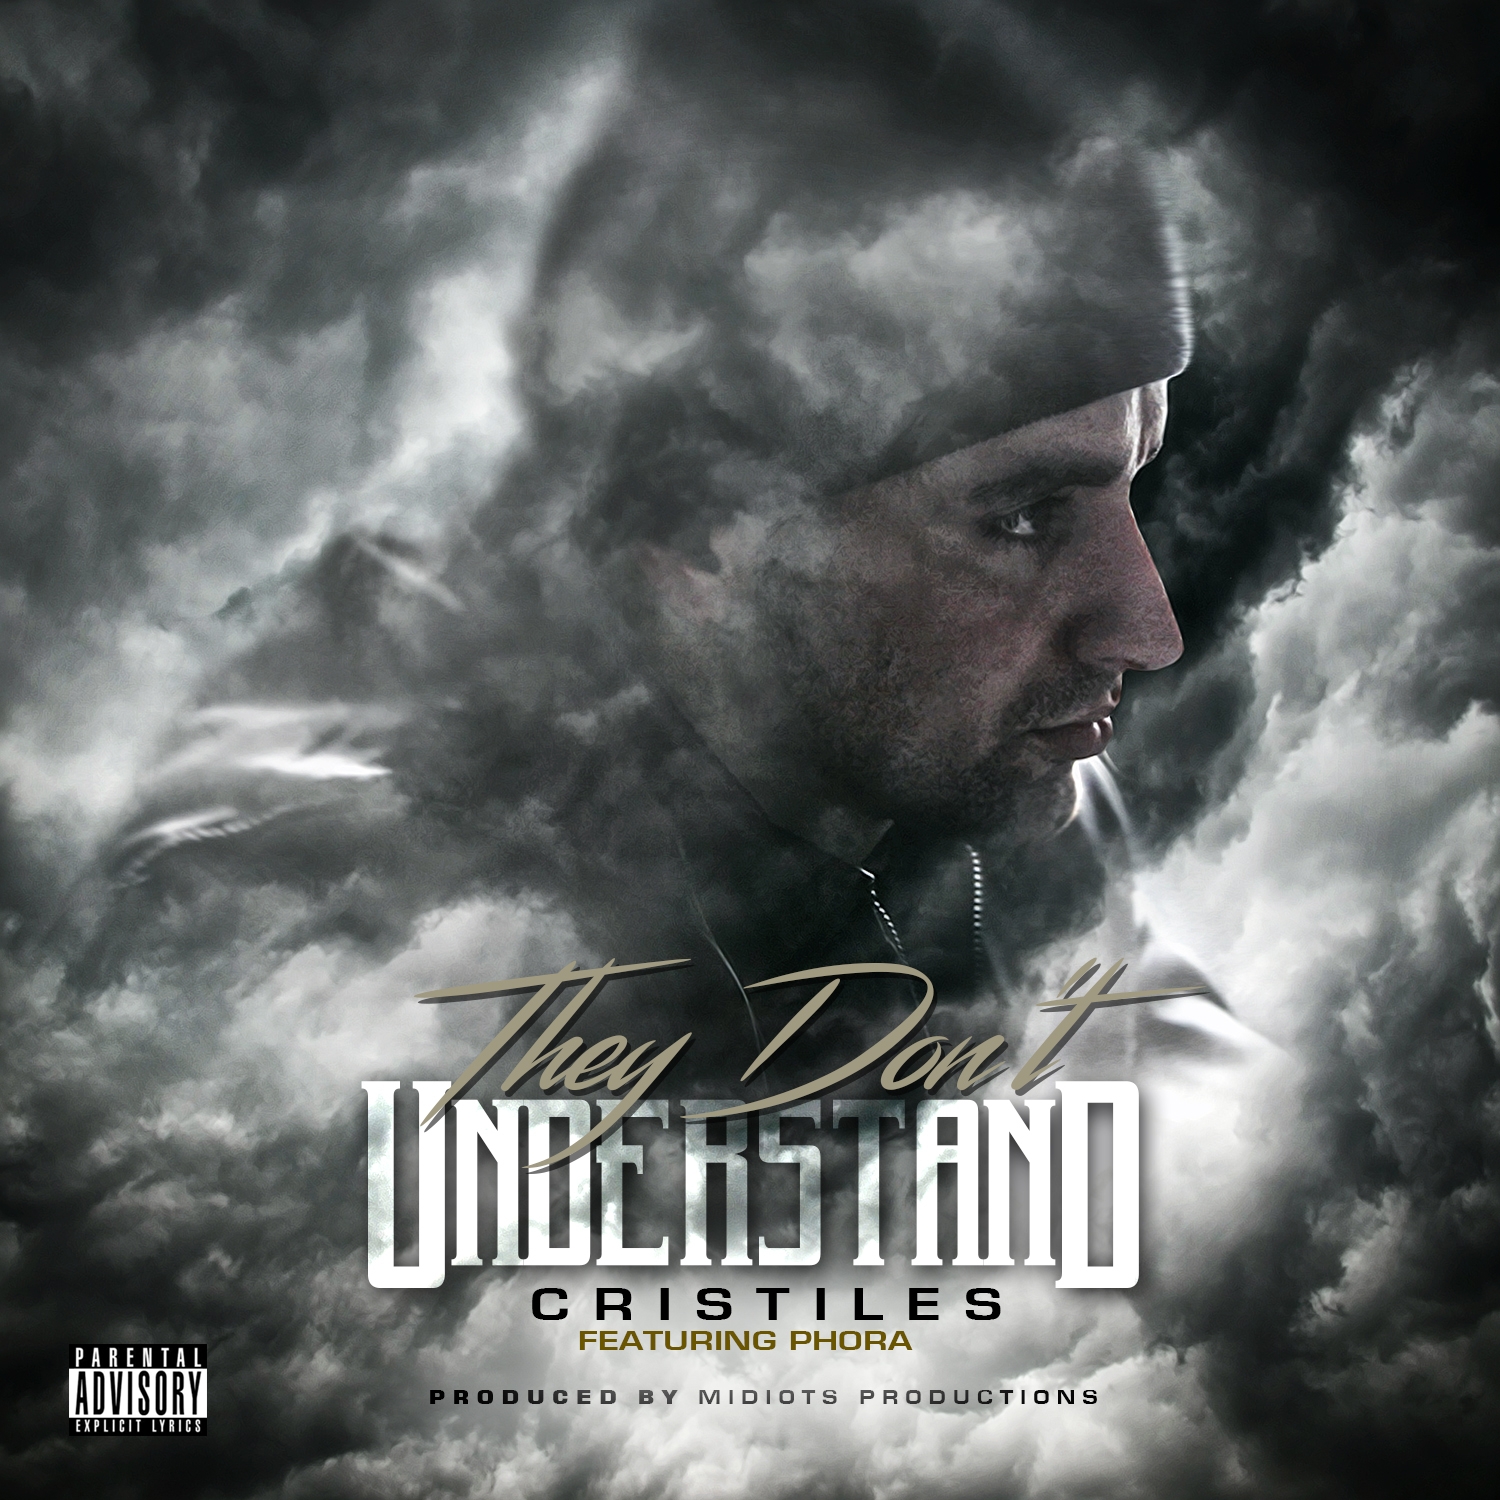 They Don't Understand (feat. Phora) - Single